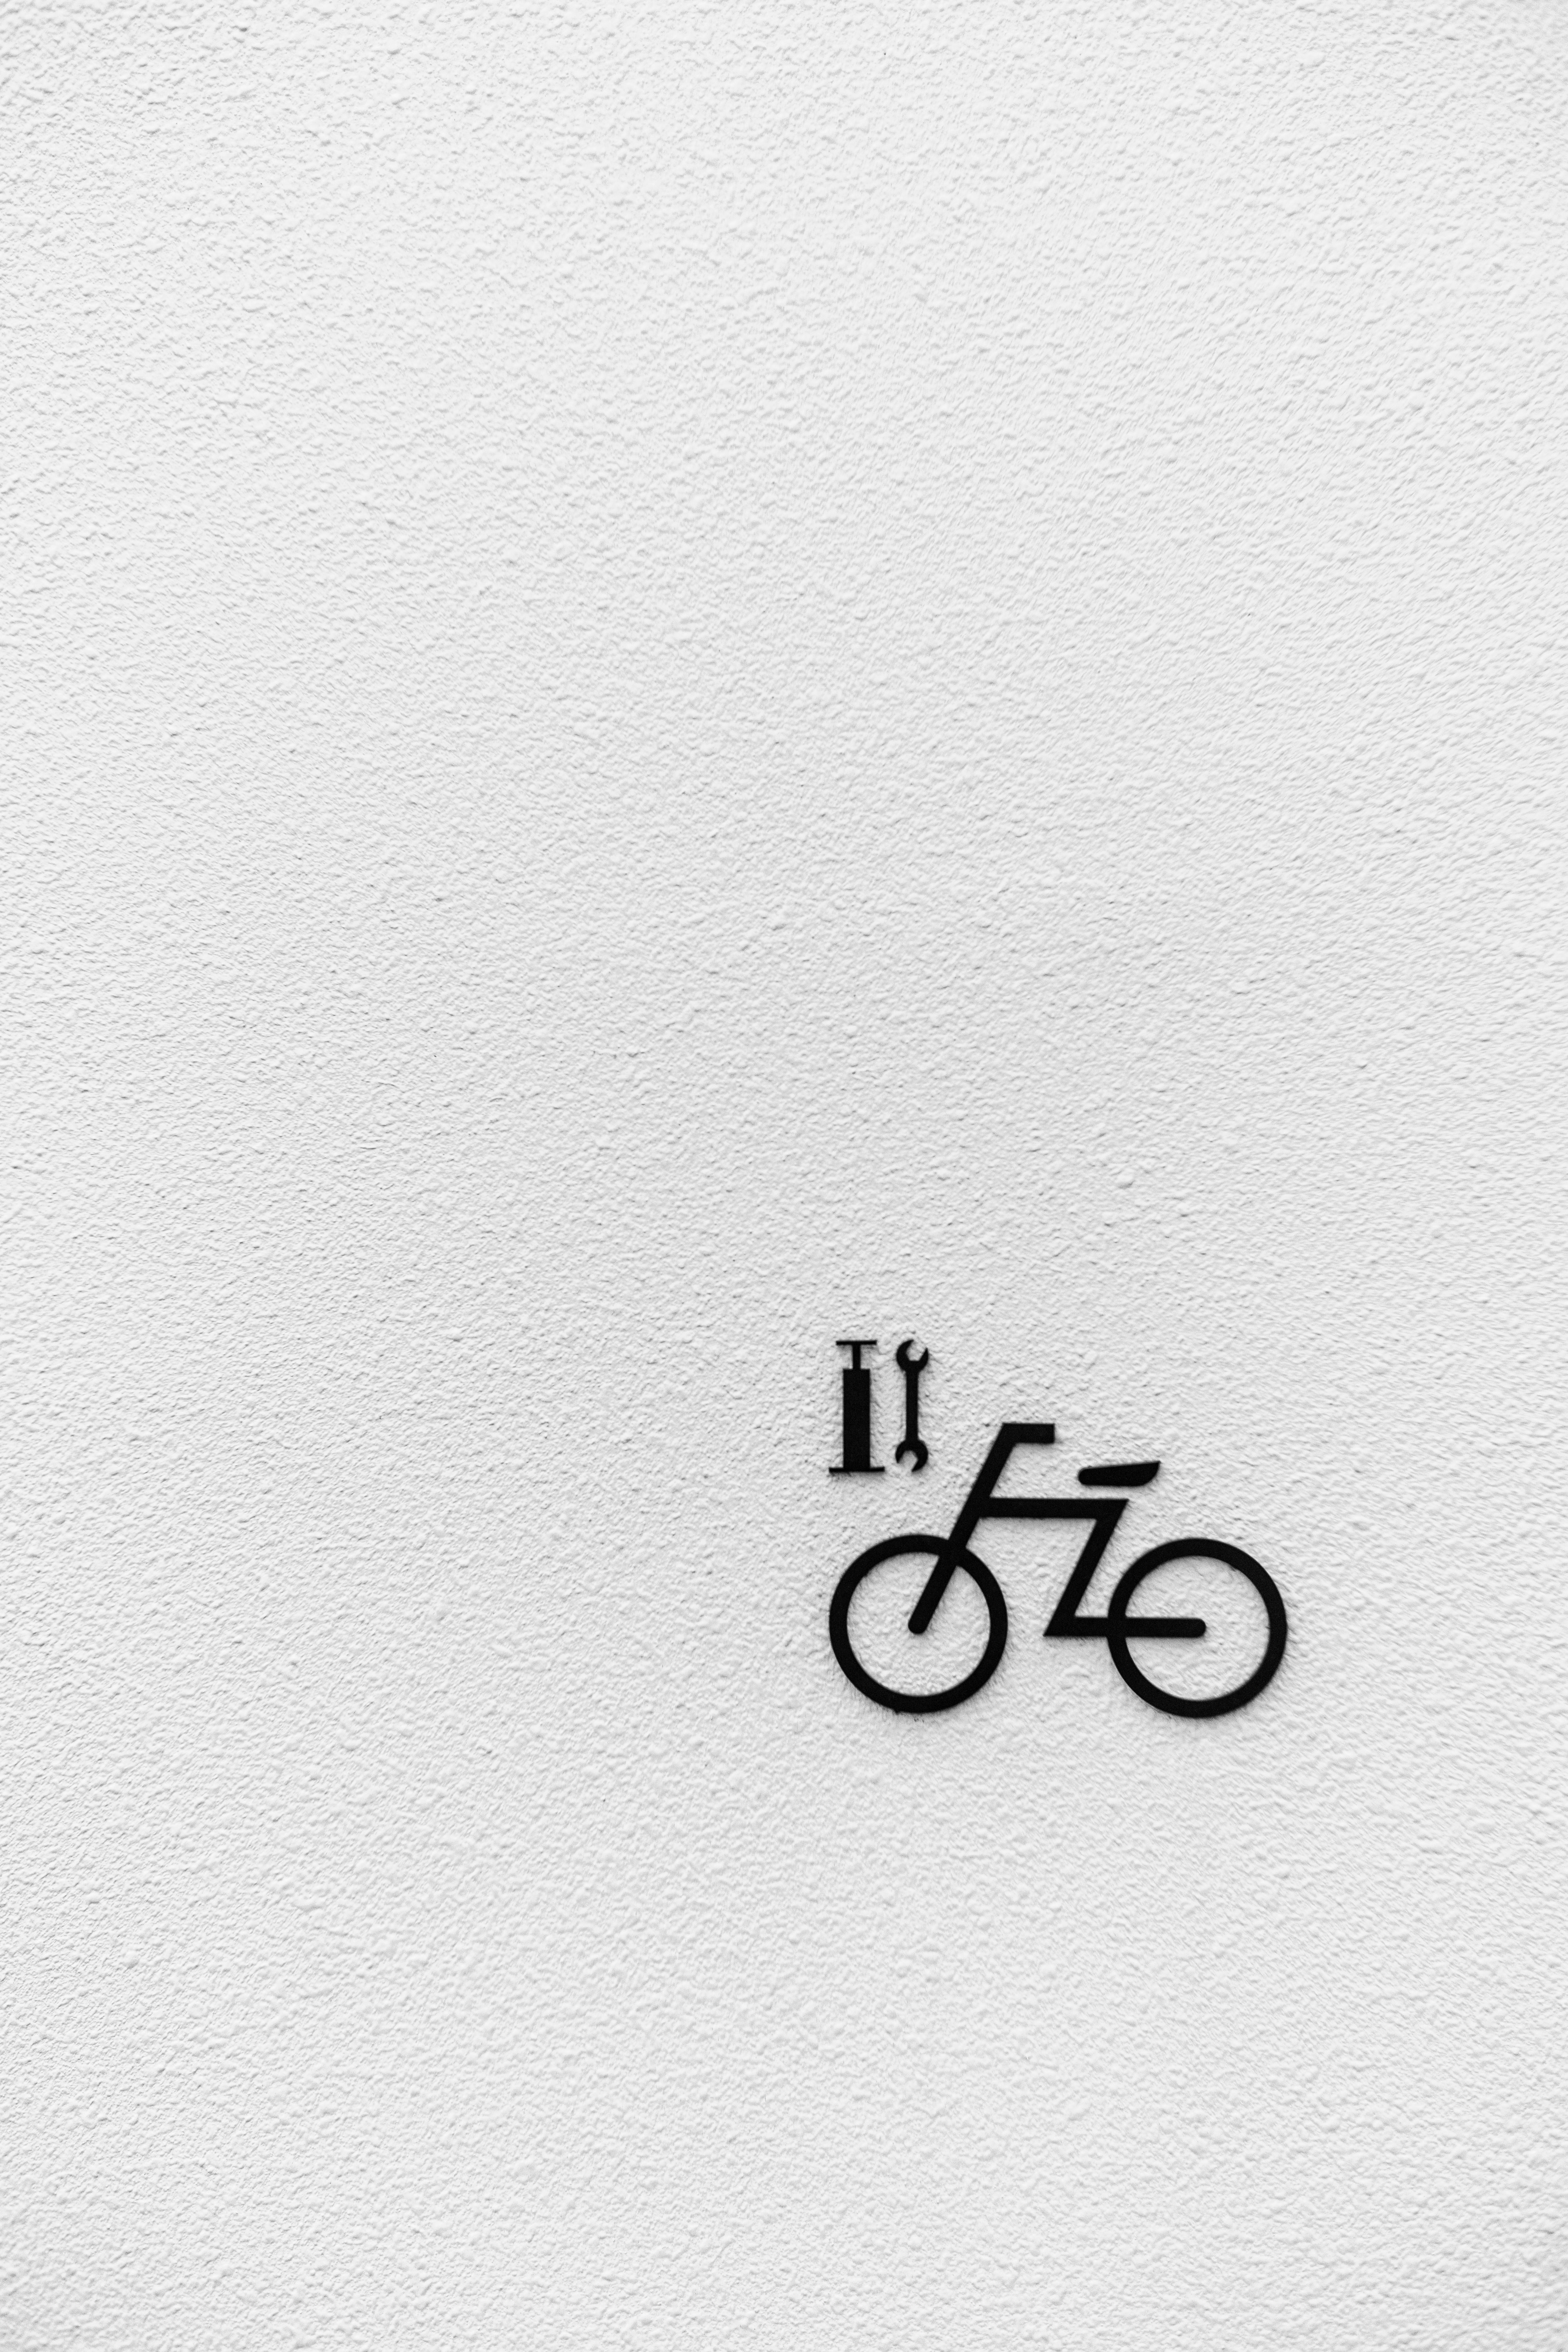 84170 Screensavers and Wallpapers Bicycle for phone. Download bicycle, texture, textures, wall pictures for free